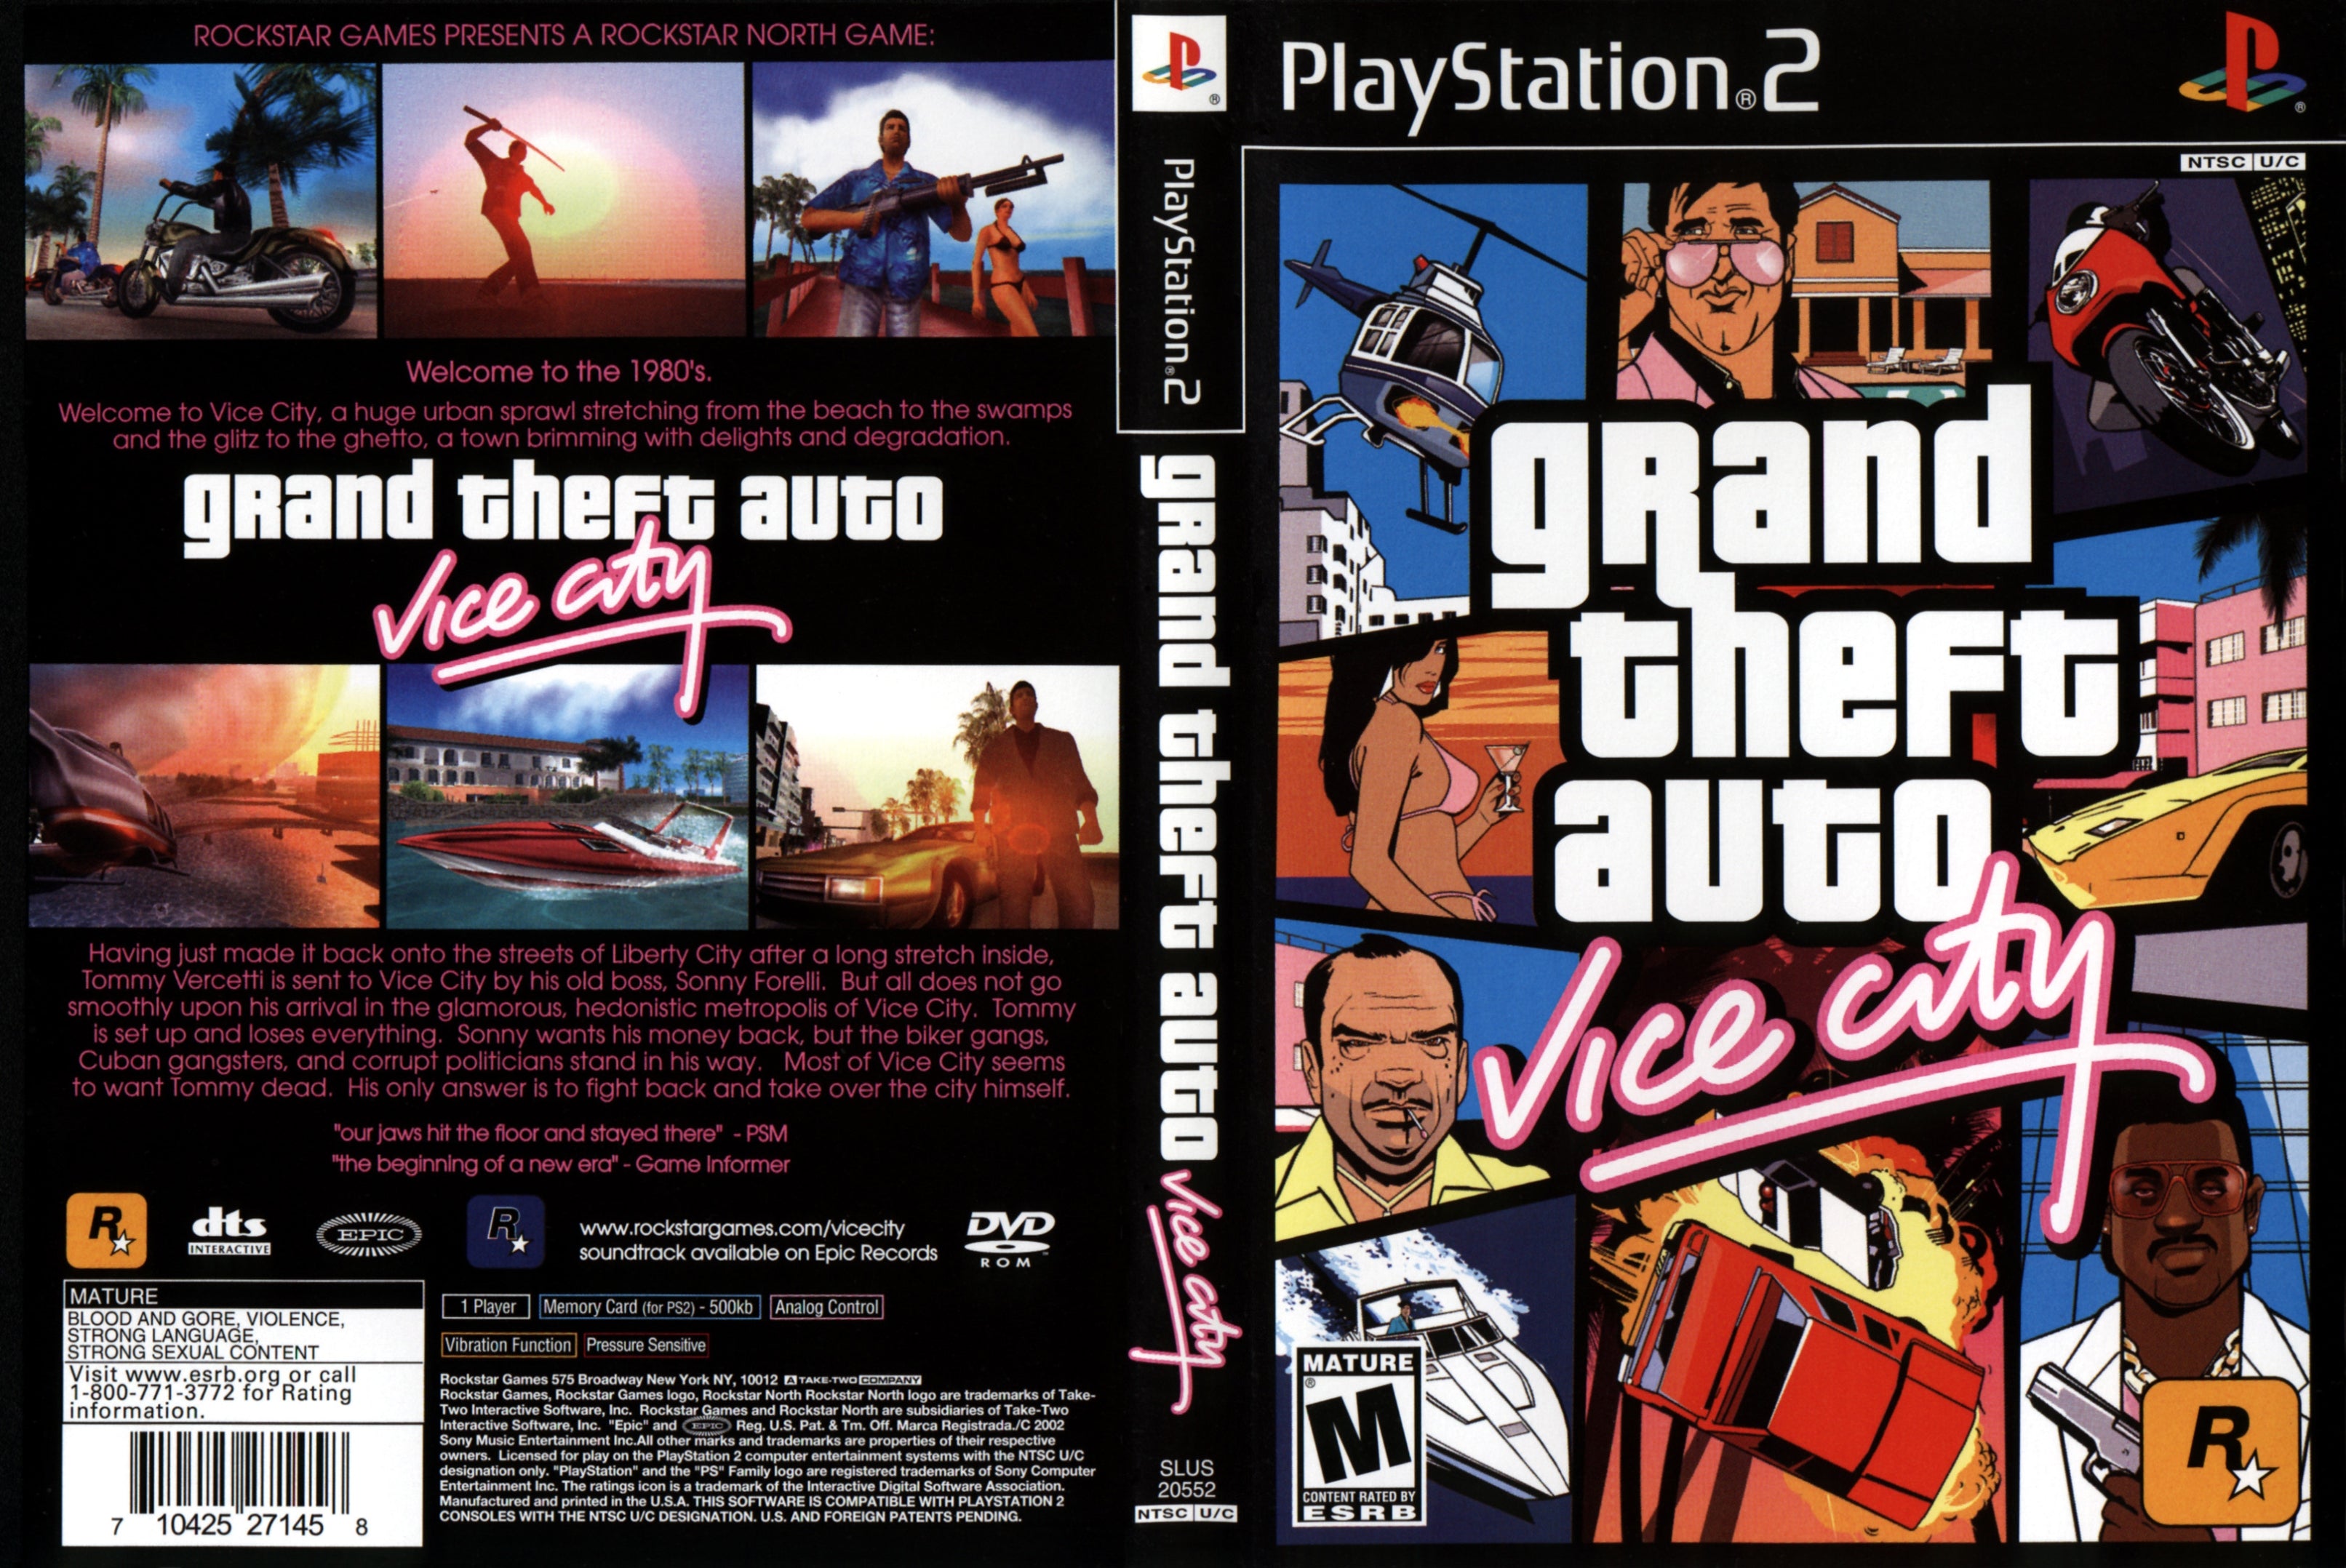 GRAND THEFT AUTO : VICE CITY - Playstation 2 (PS2) iso download